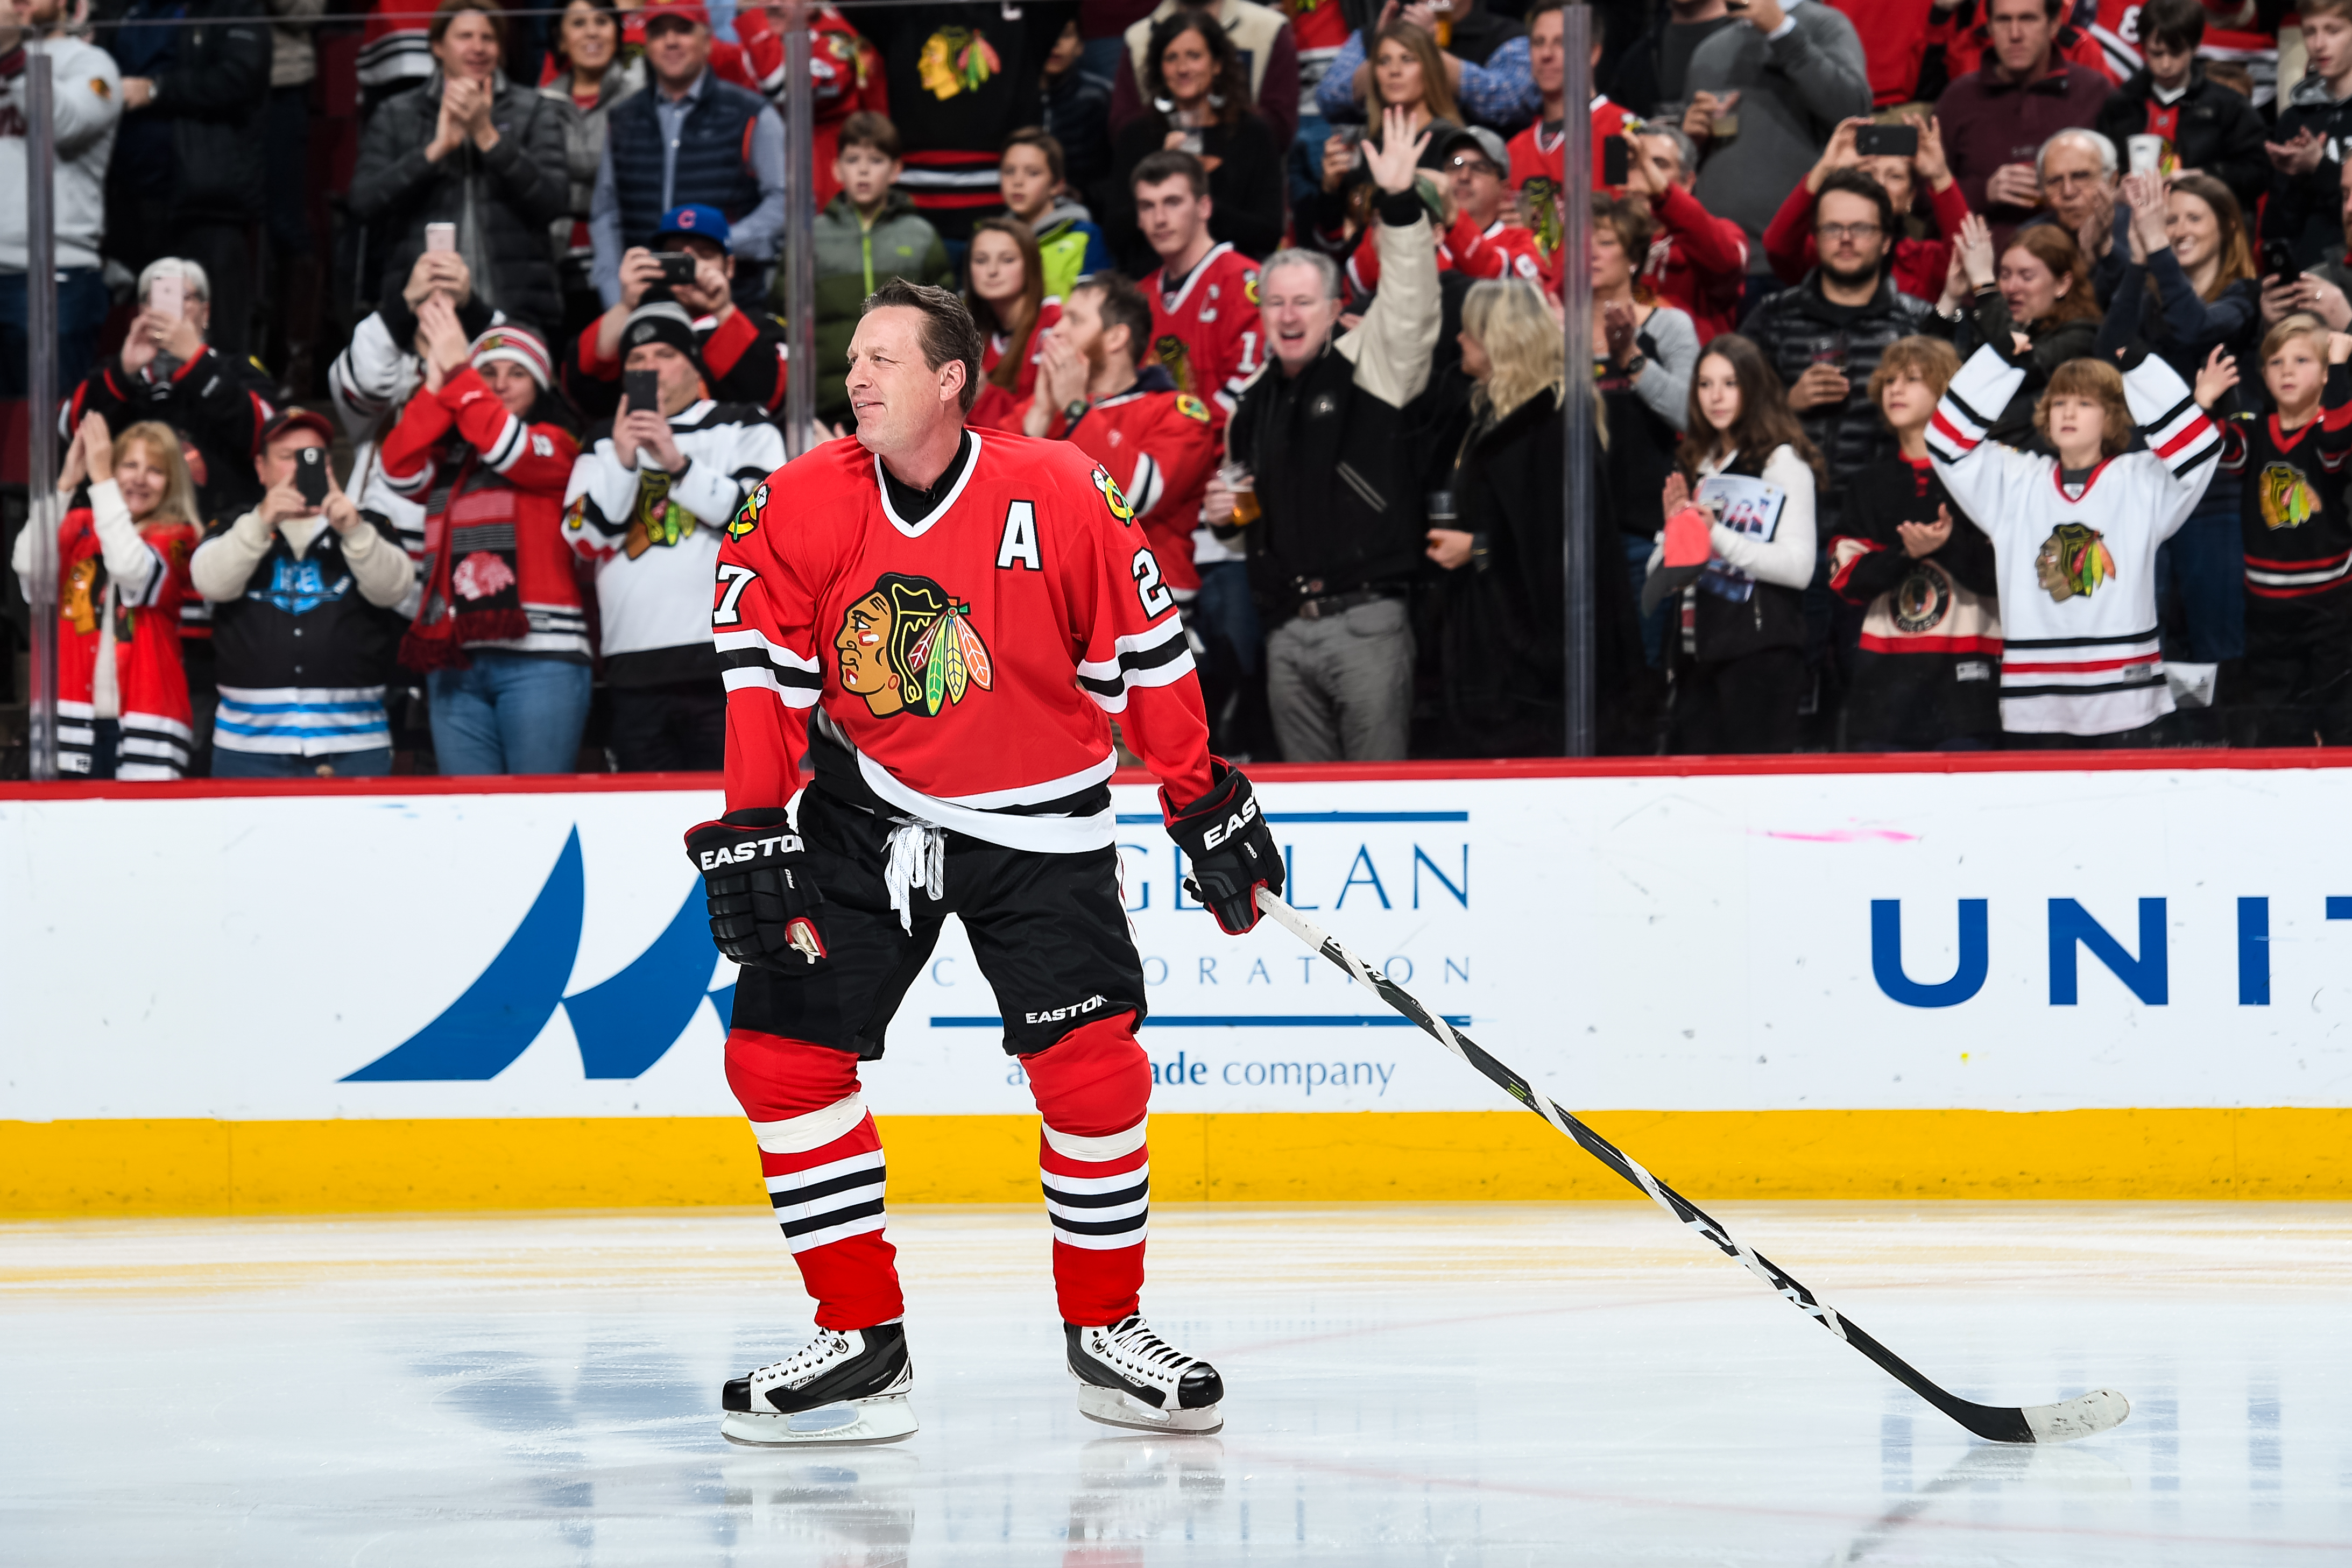 Chicago Blackhawks: Jeremy Roenick should be in Hall of Fame